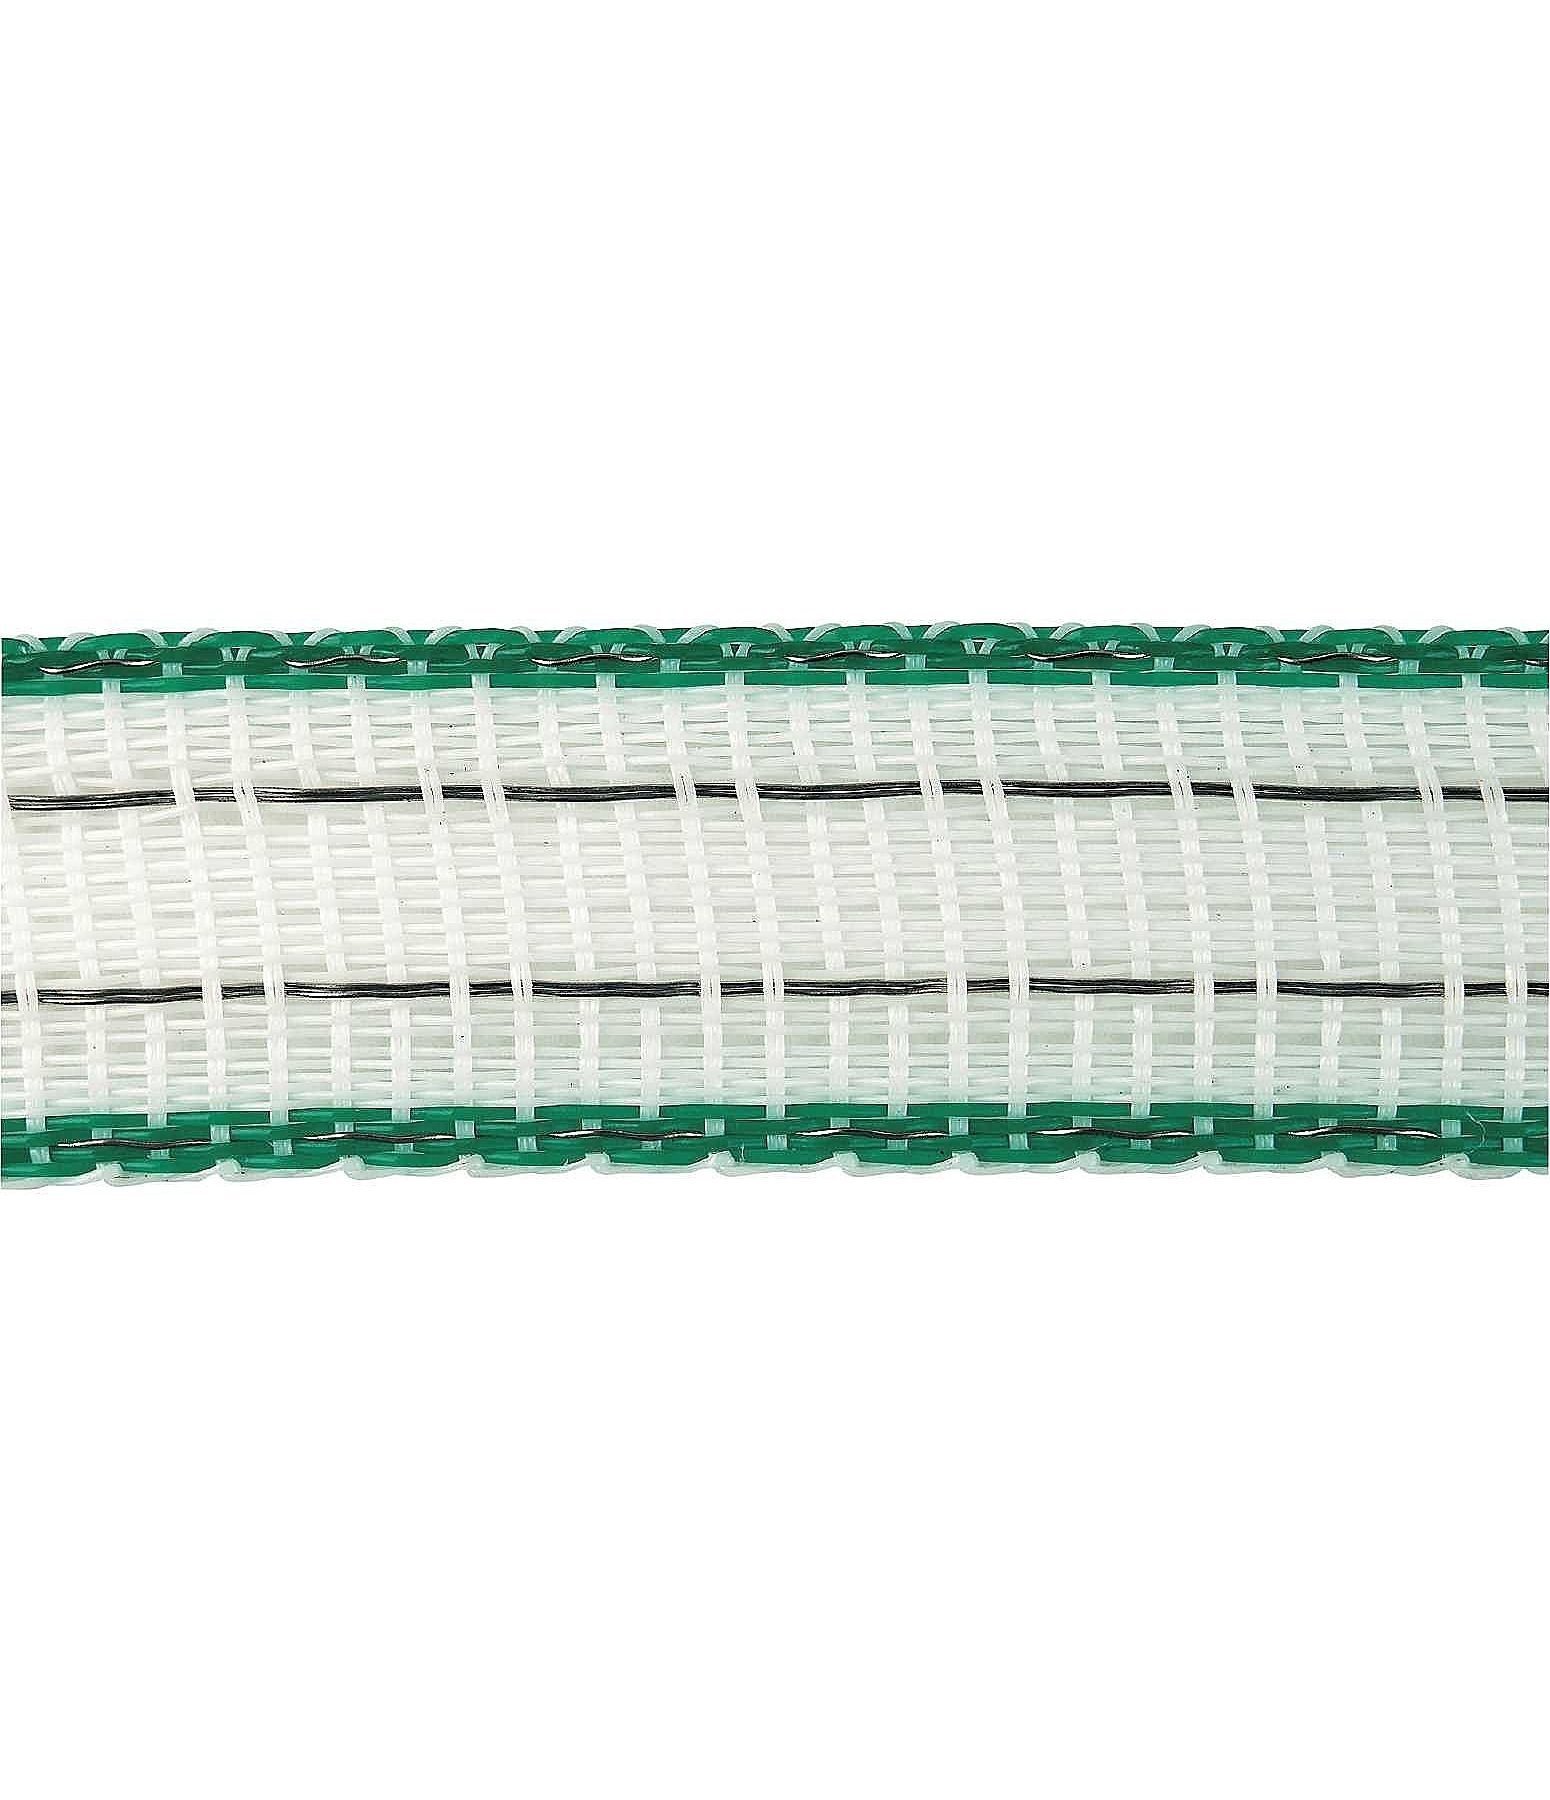 Breitband Star Class DeLuxe, 200 m / 12 mm Rolle